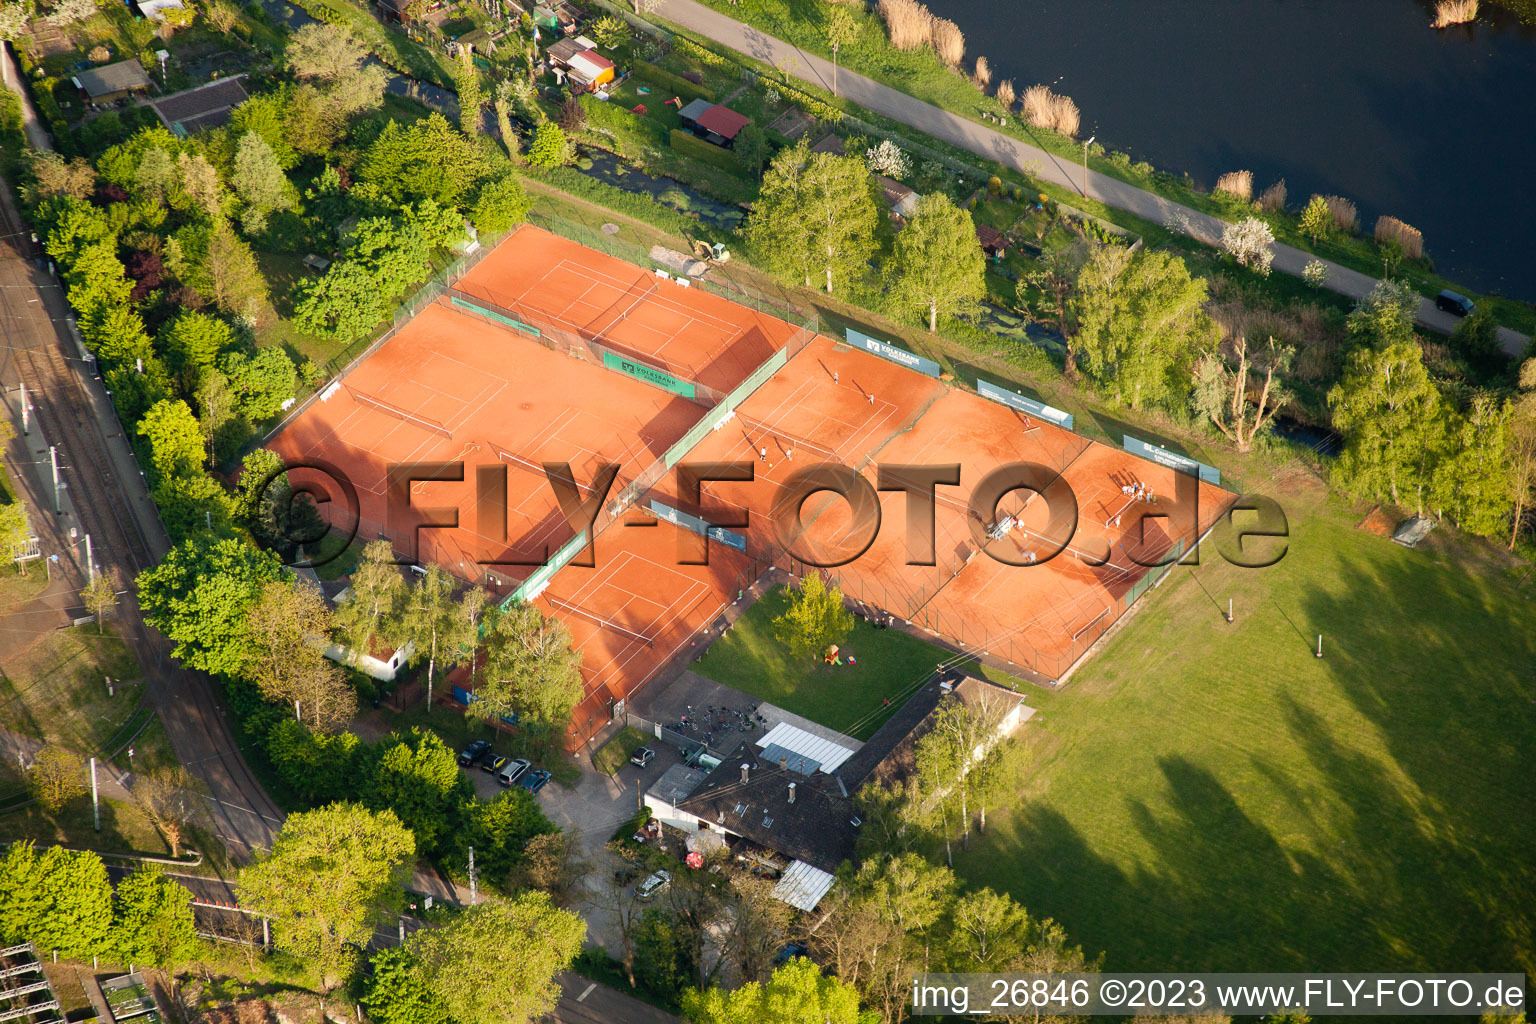 Sports facilities tennis club in the district Daxlanden in Karlsruhe in the state Baden-Wuerttemberg, Germany